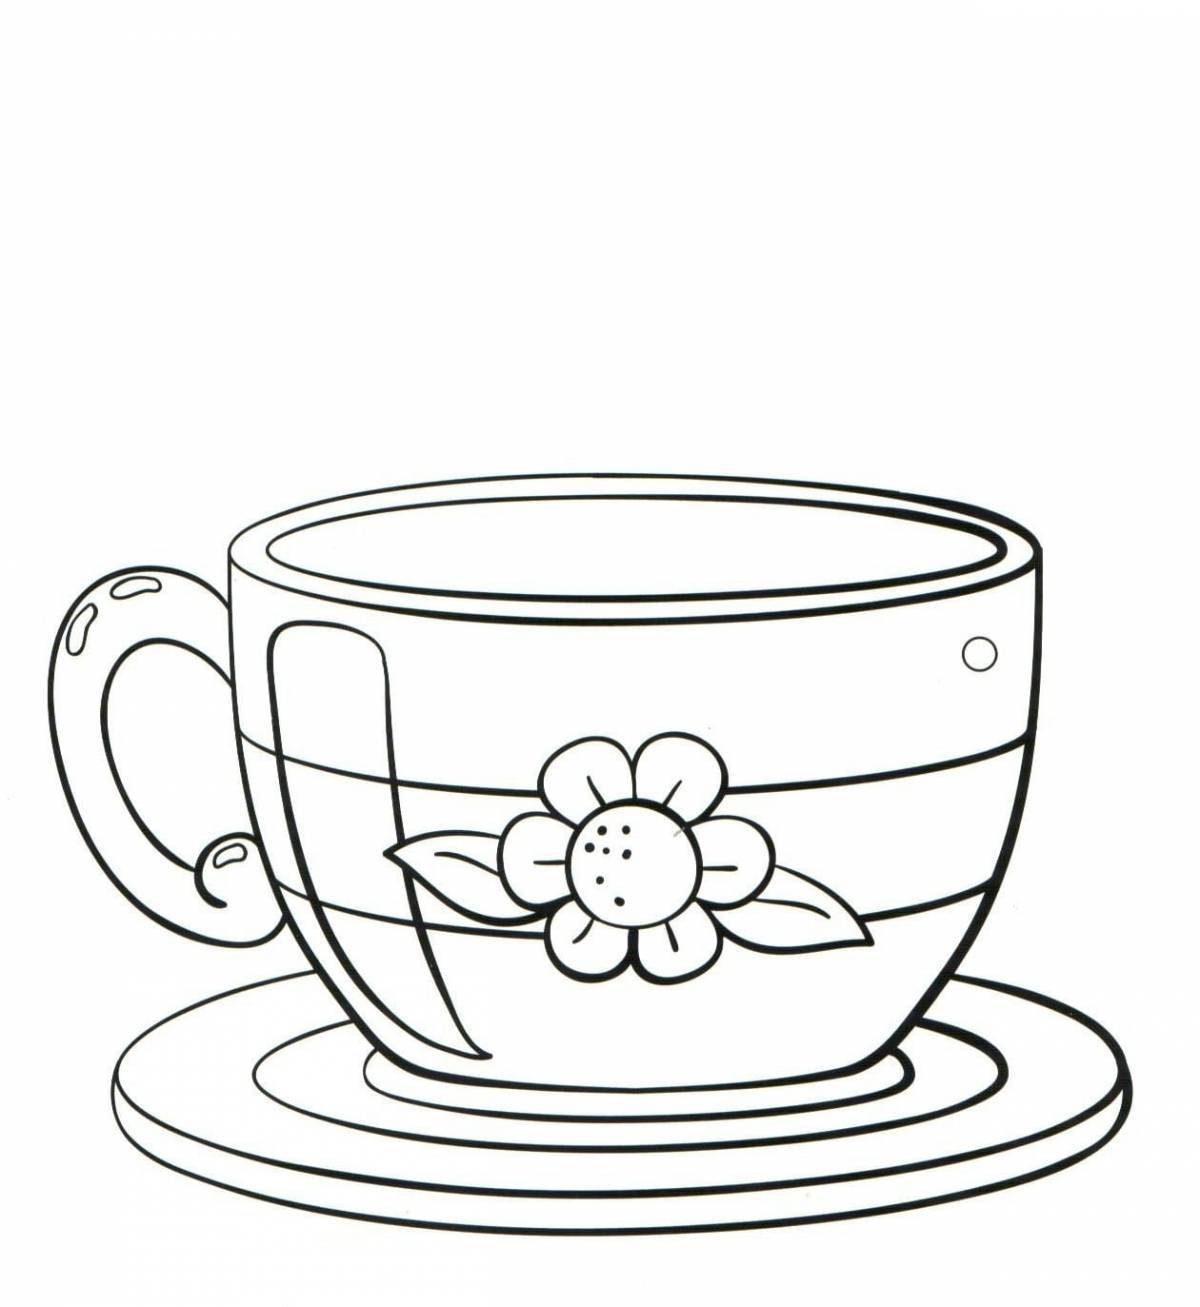 Animated cup and saucer coloring page